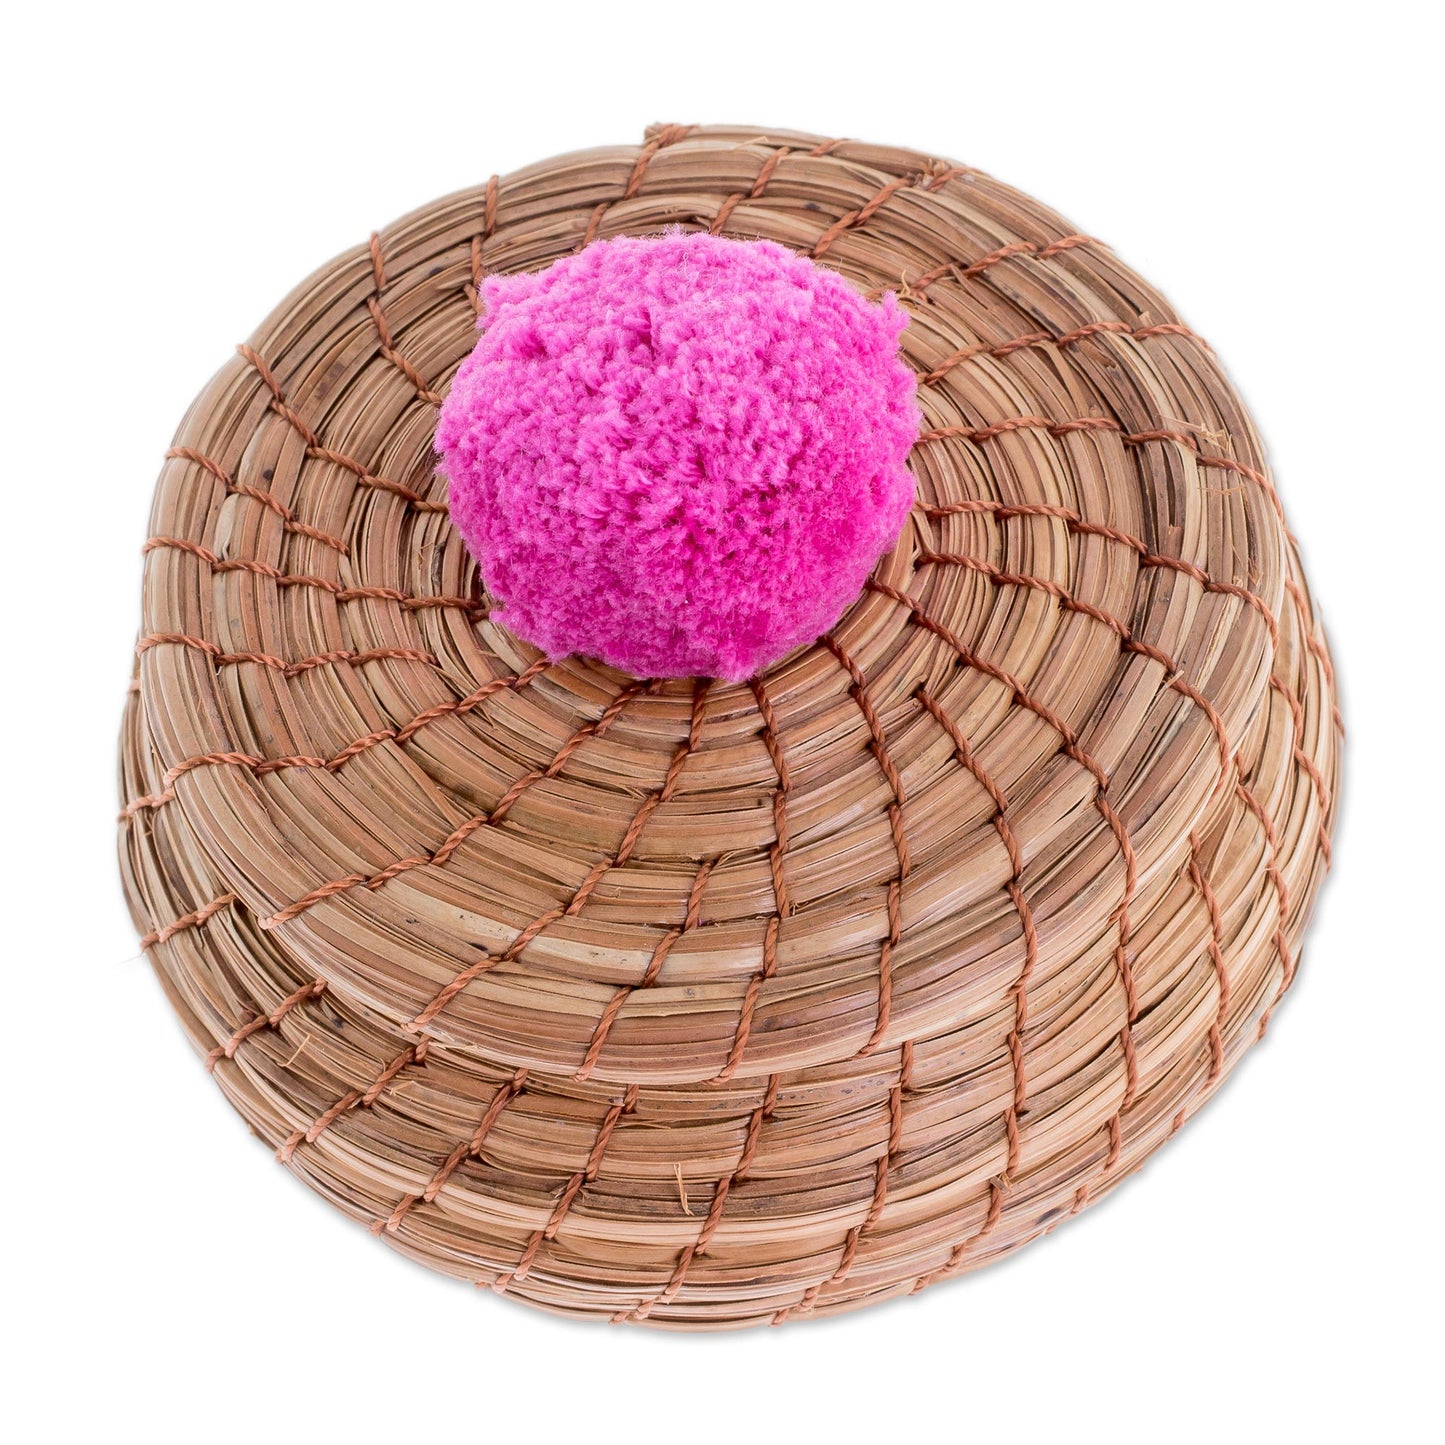 Natural Enchantment in Fuchsia Handmade Pine Needle Basket with a Fuchsia Cotton Pompom